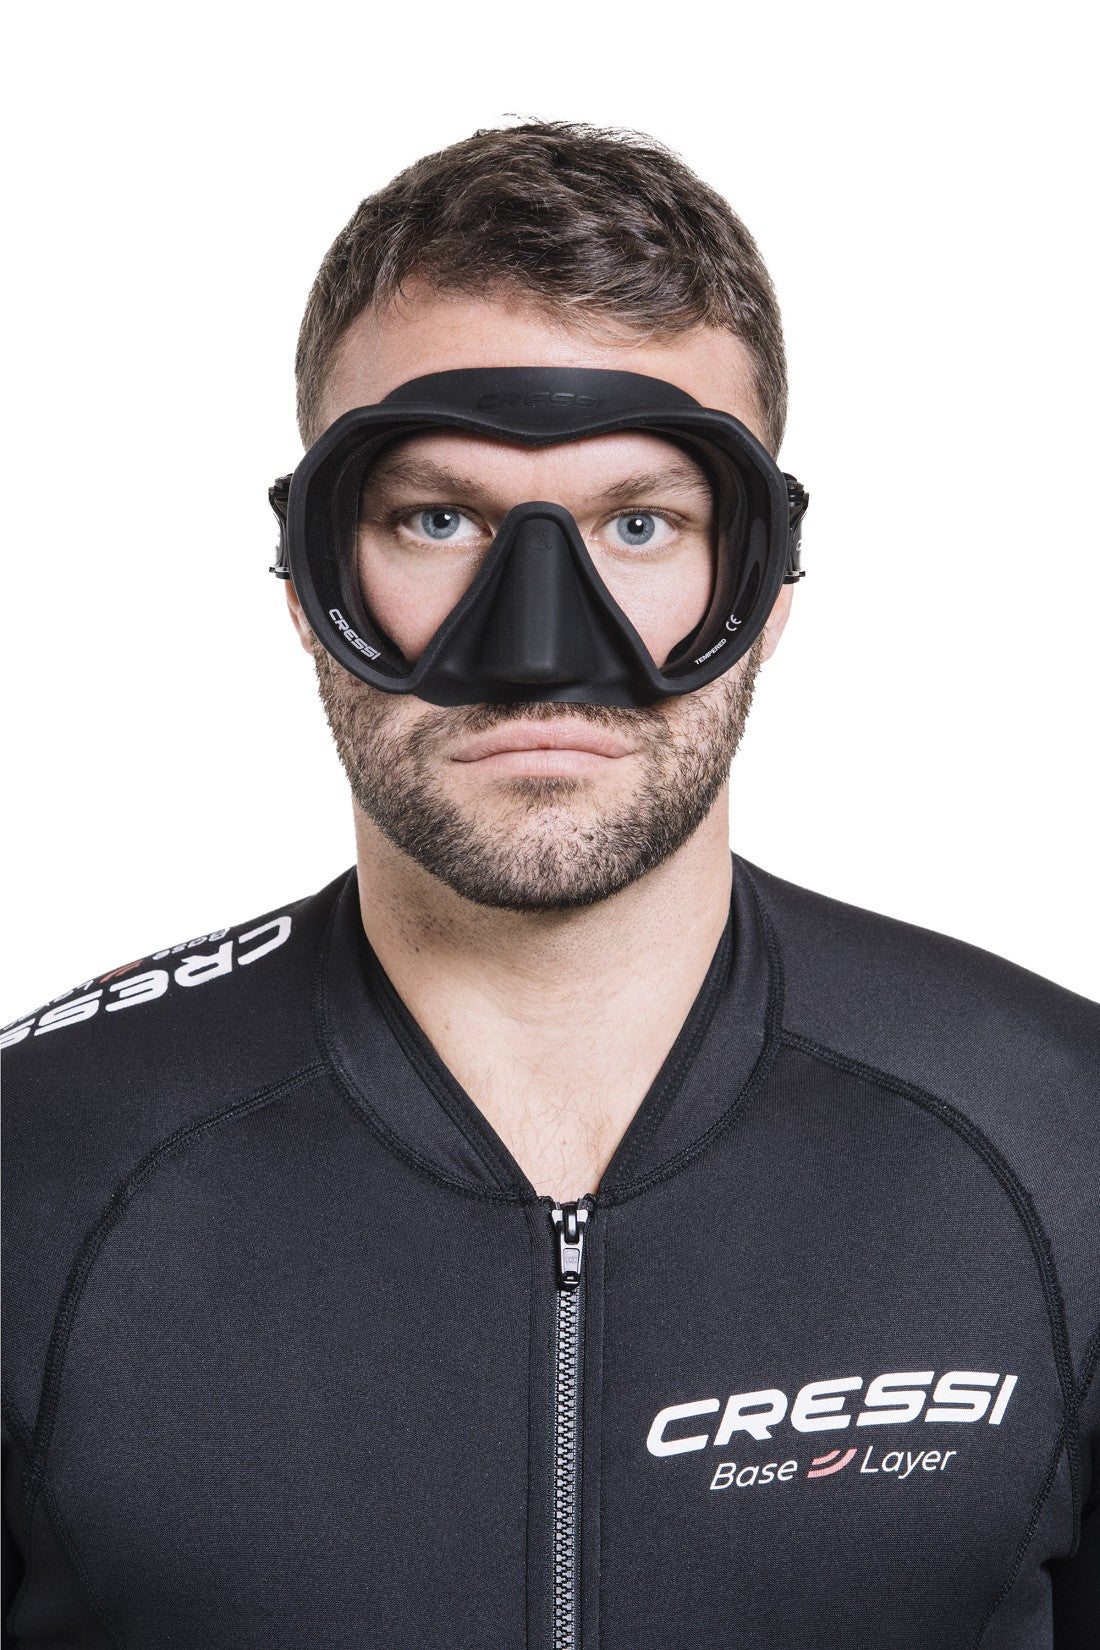 Dive with clarity and comfort: Cressi Z1 frameless mask